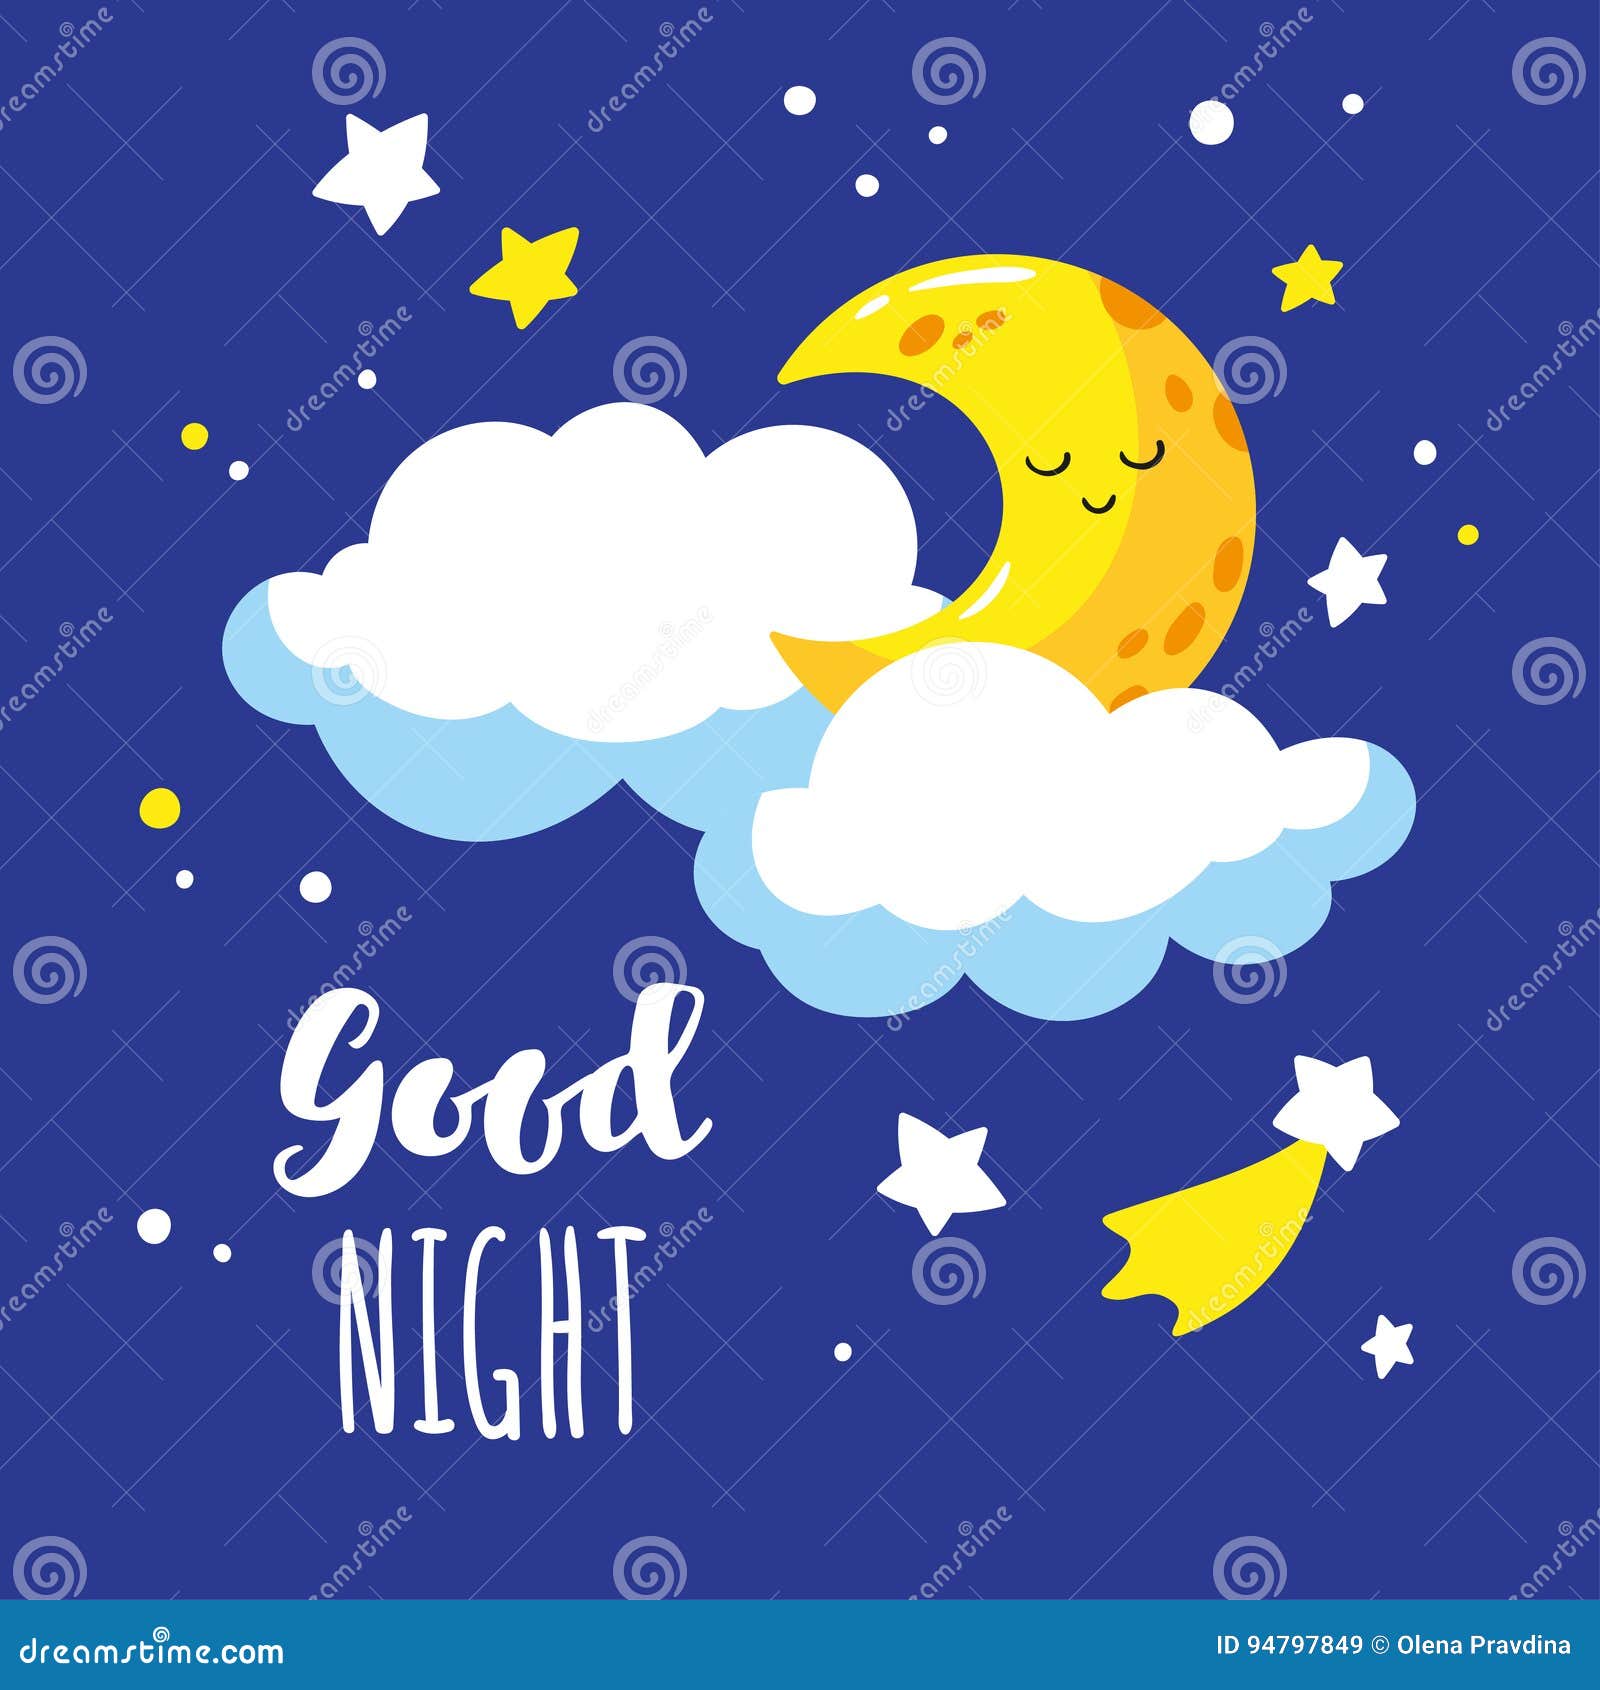 Cute Cartoon Crescent and Clouds in the Night Sky. Handwriting ...